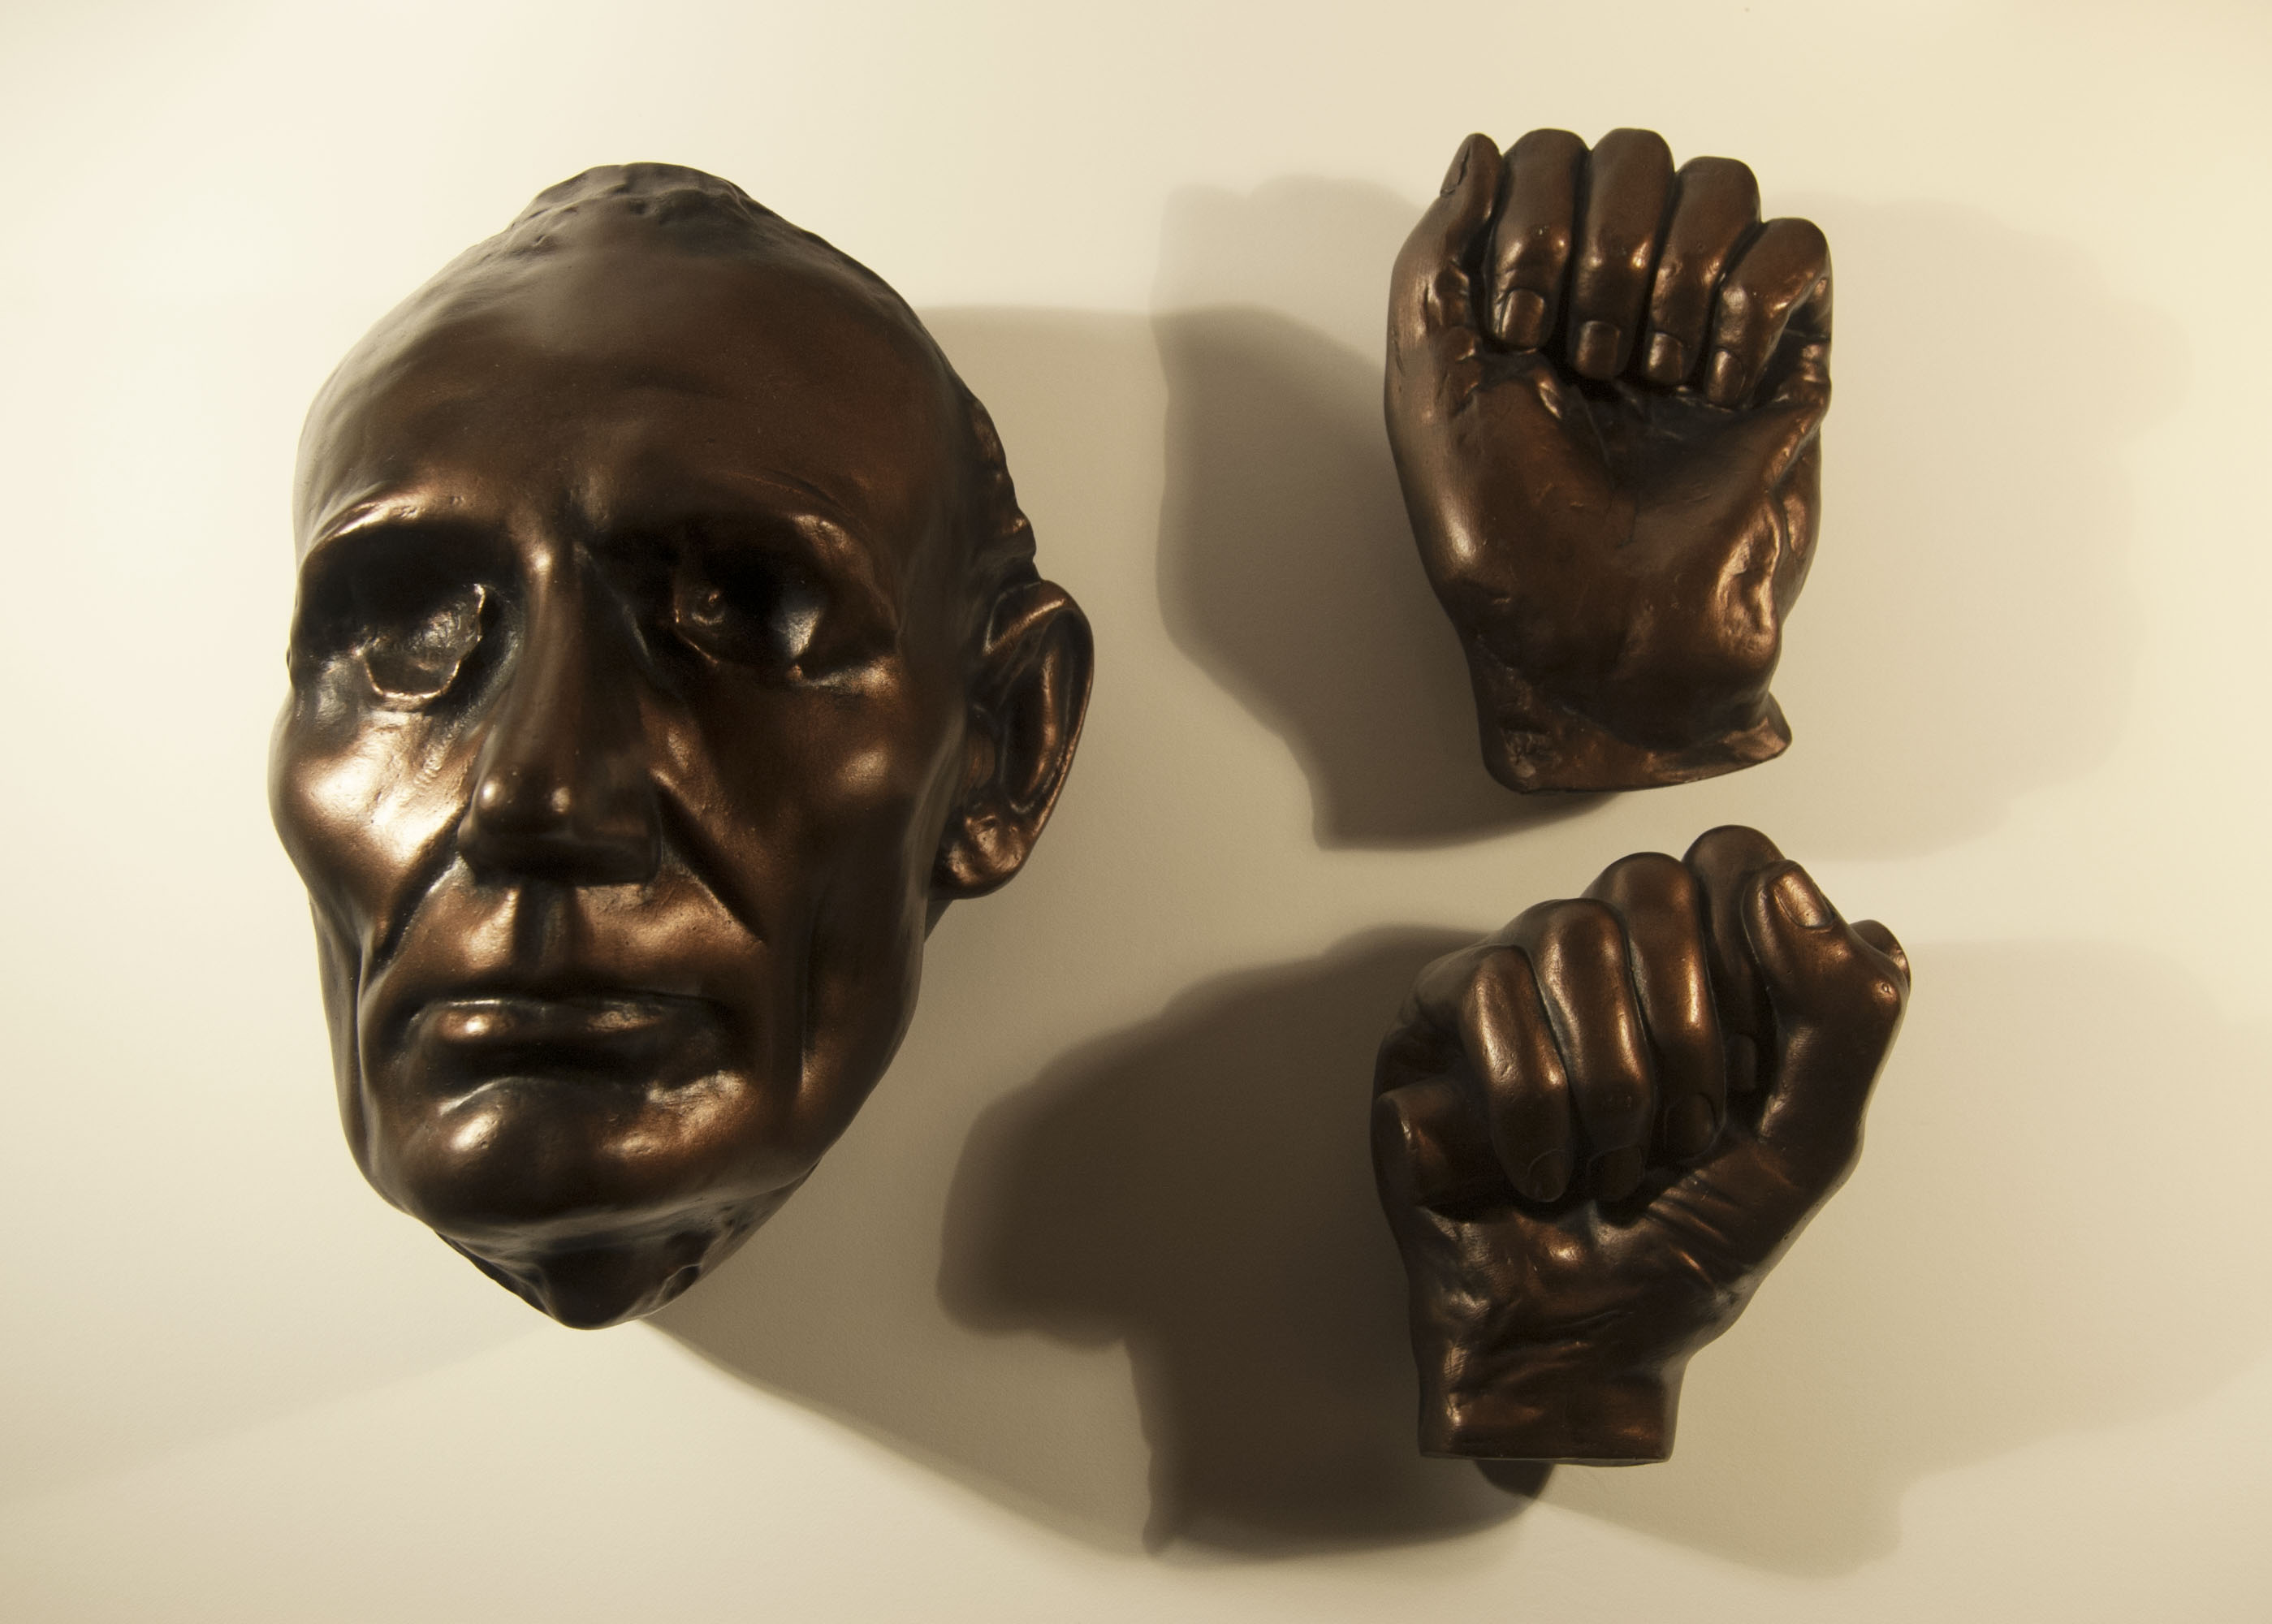 Life mask of Abraham Lincoln with hands, 1860.